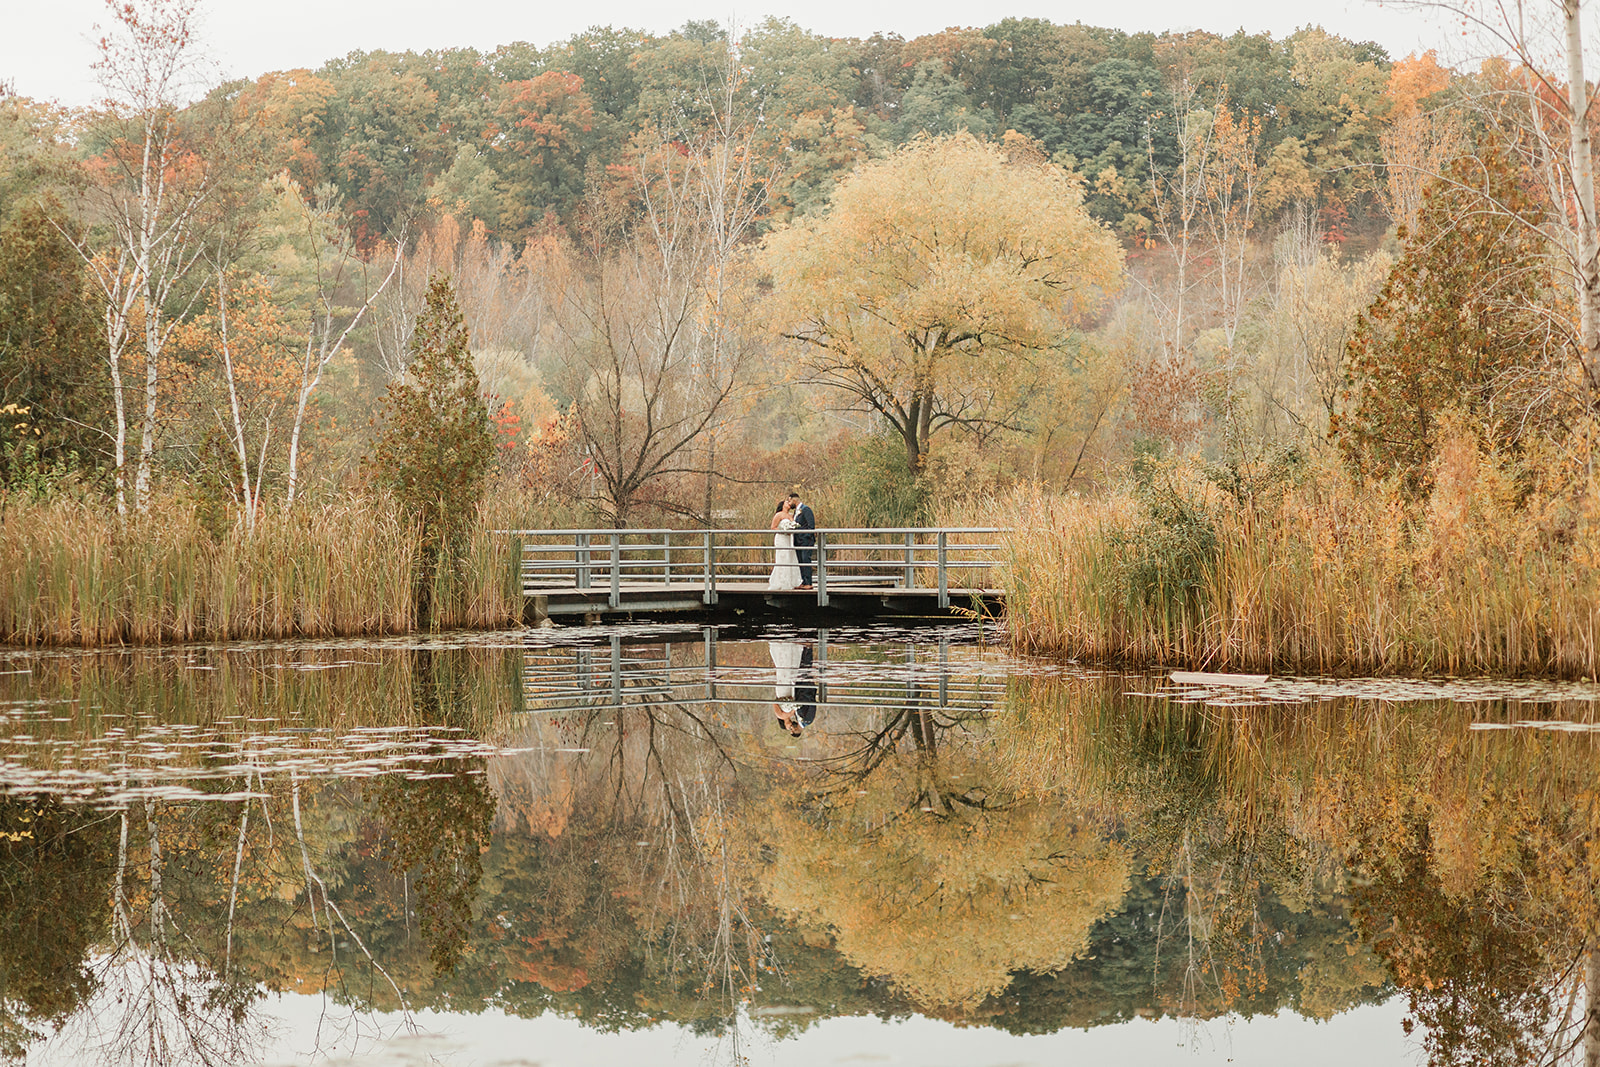 A couple kissing after their Toronto wedding at Evergreen Brick Works during the autumn season 